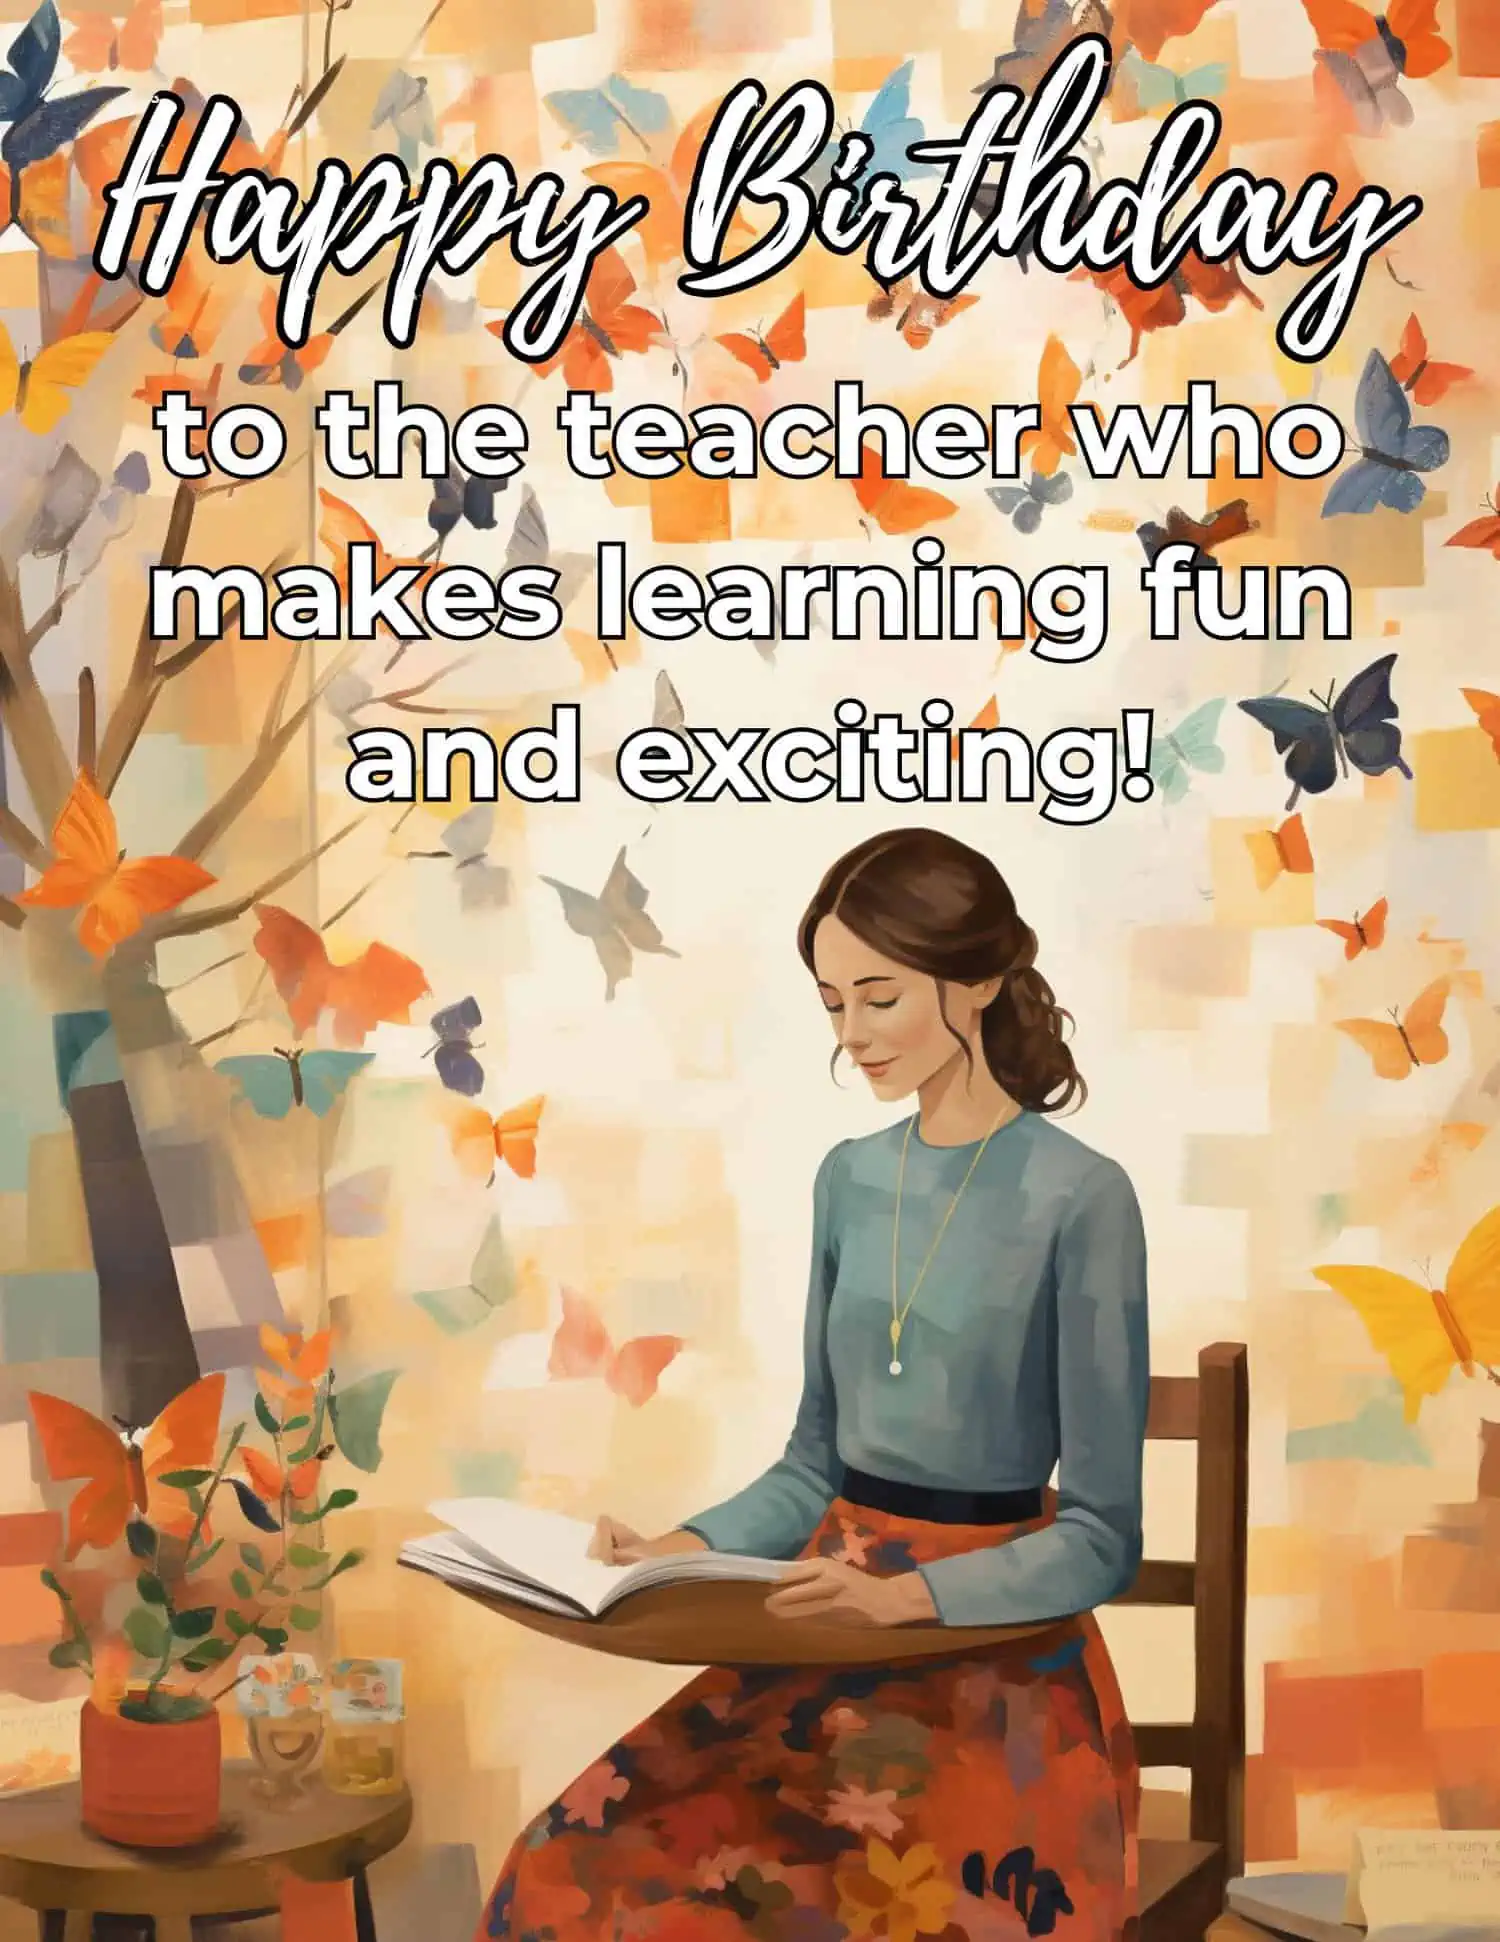 A collection of heartwarming birthday messages for educators.